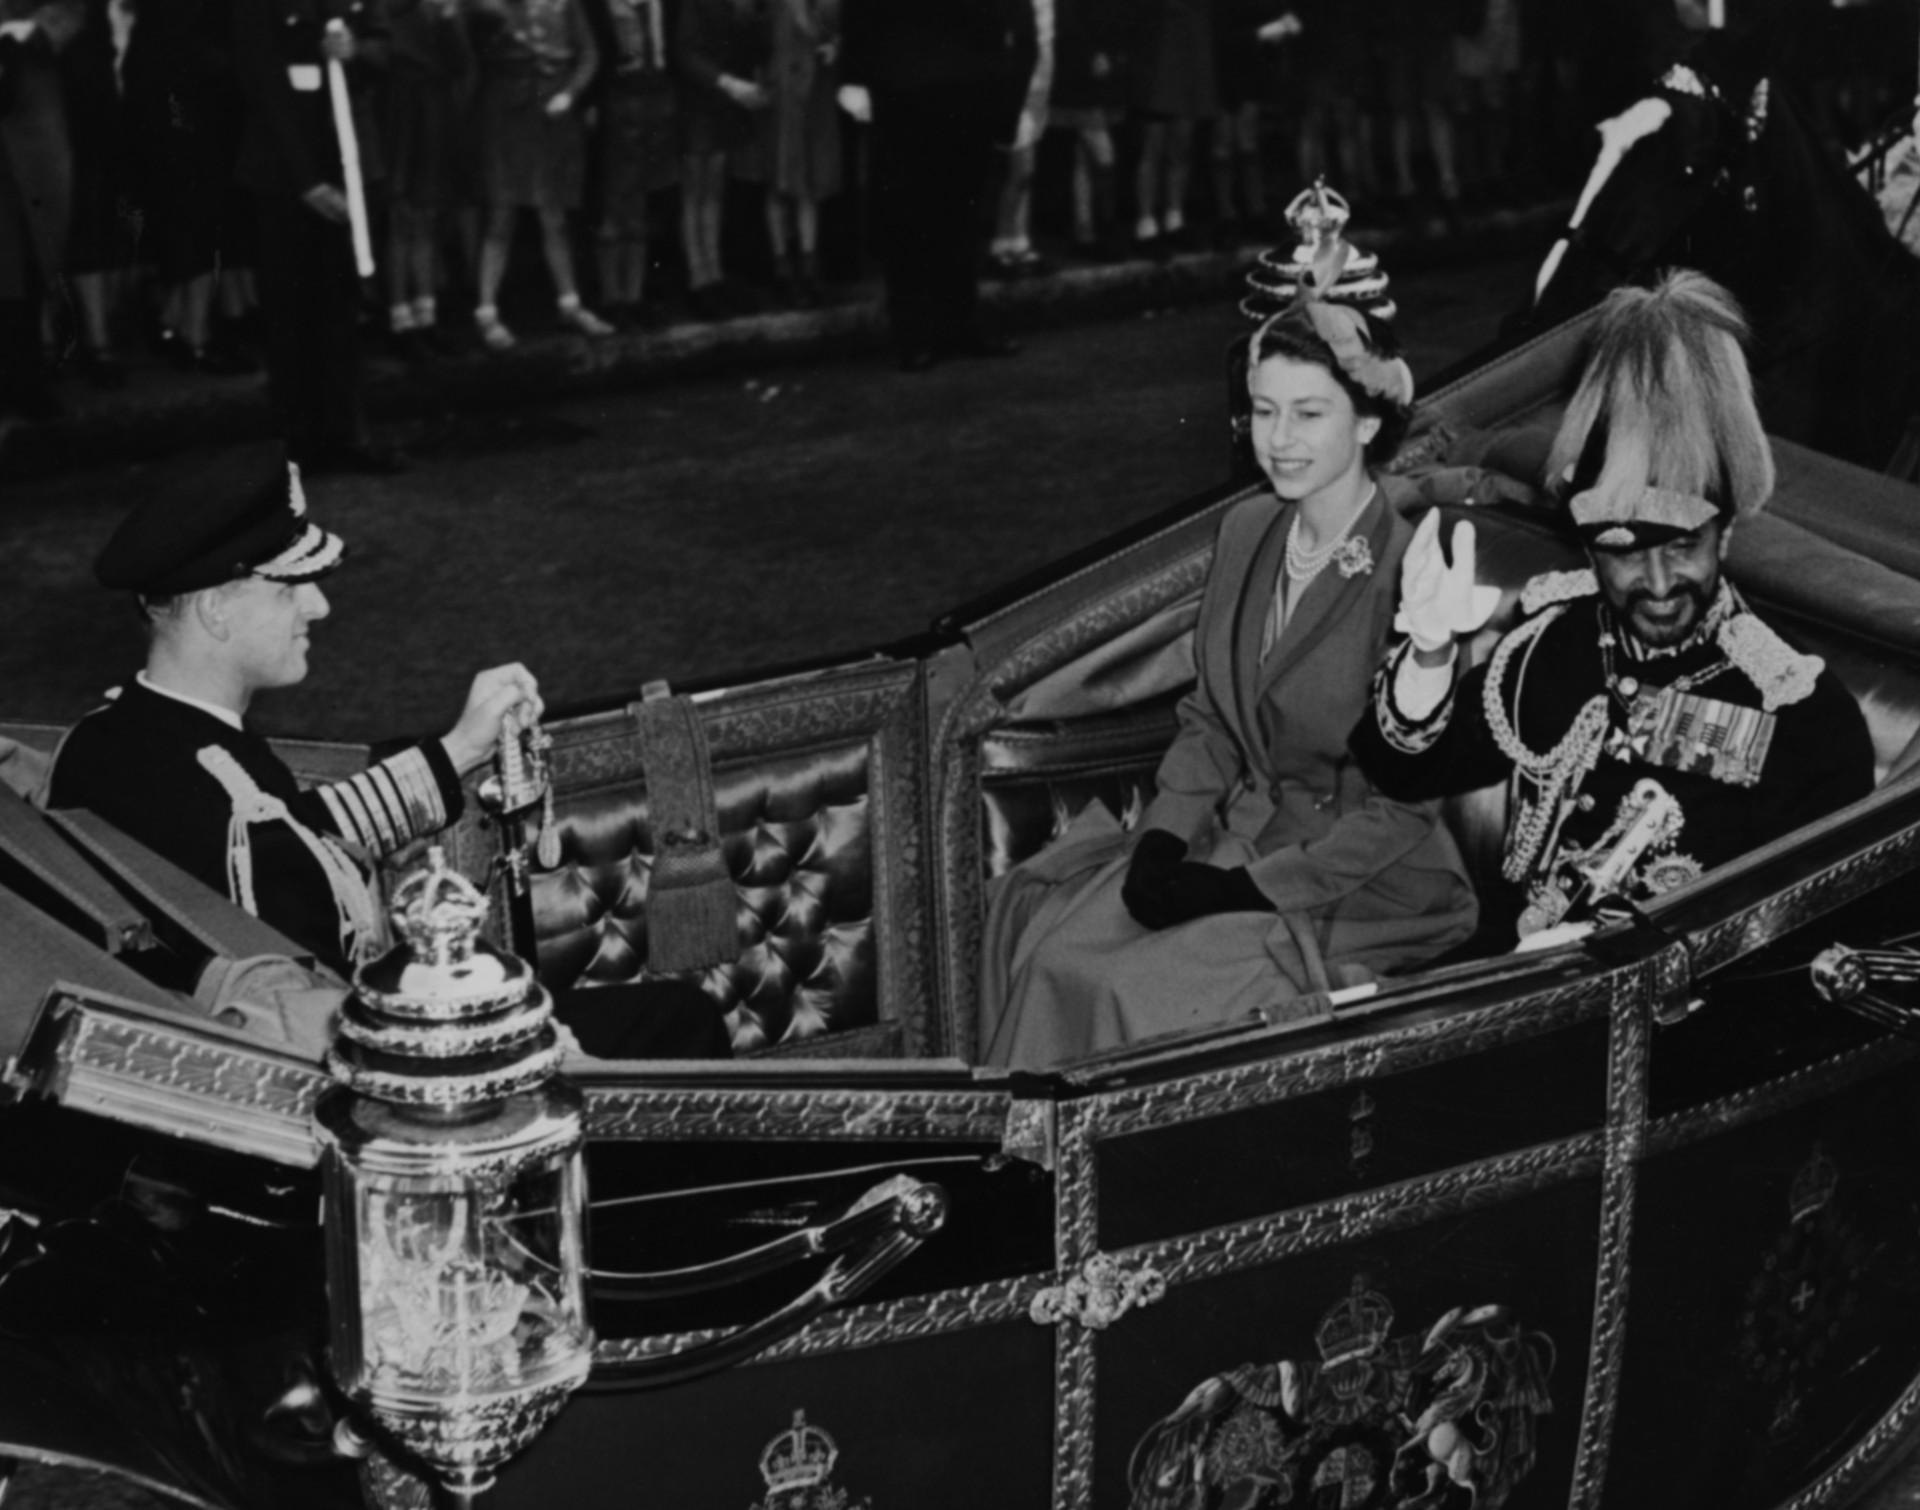 Emperor Haile Selassie of Ethiopia waves to the crowds as he rides in an open carriage with Queen Elizabeth II and <a href="https://uk.starsinsider.com/celebrity/256255/the-life-and-times-of-hrh-prince-philip-duke-of-edinburgh" rel="noopener">Prince Philip</a>.<p><a href="https://www.msn.com/en-za/community/channel/vid-7xx8mnucu55yw63we9va2gwr7uihbxwc68fxqp25x6tg4ftibpra?cvid=94631541bc0f4f89bfd59158d696ad7e">Follow us and access great exclusive content every day</a></p>